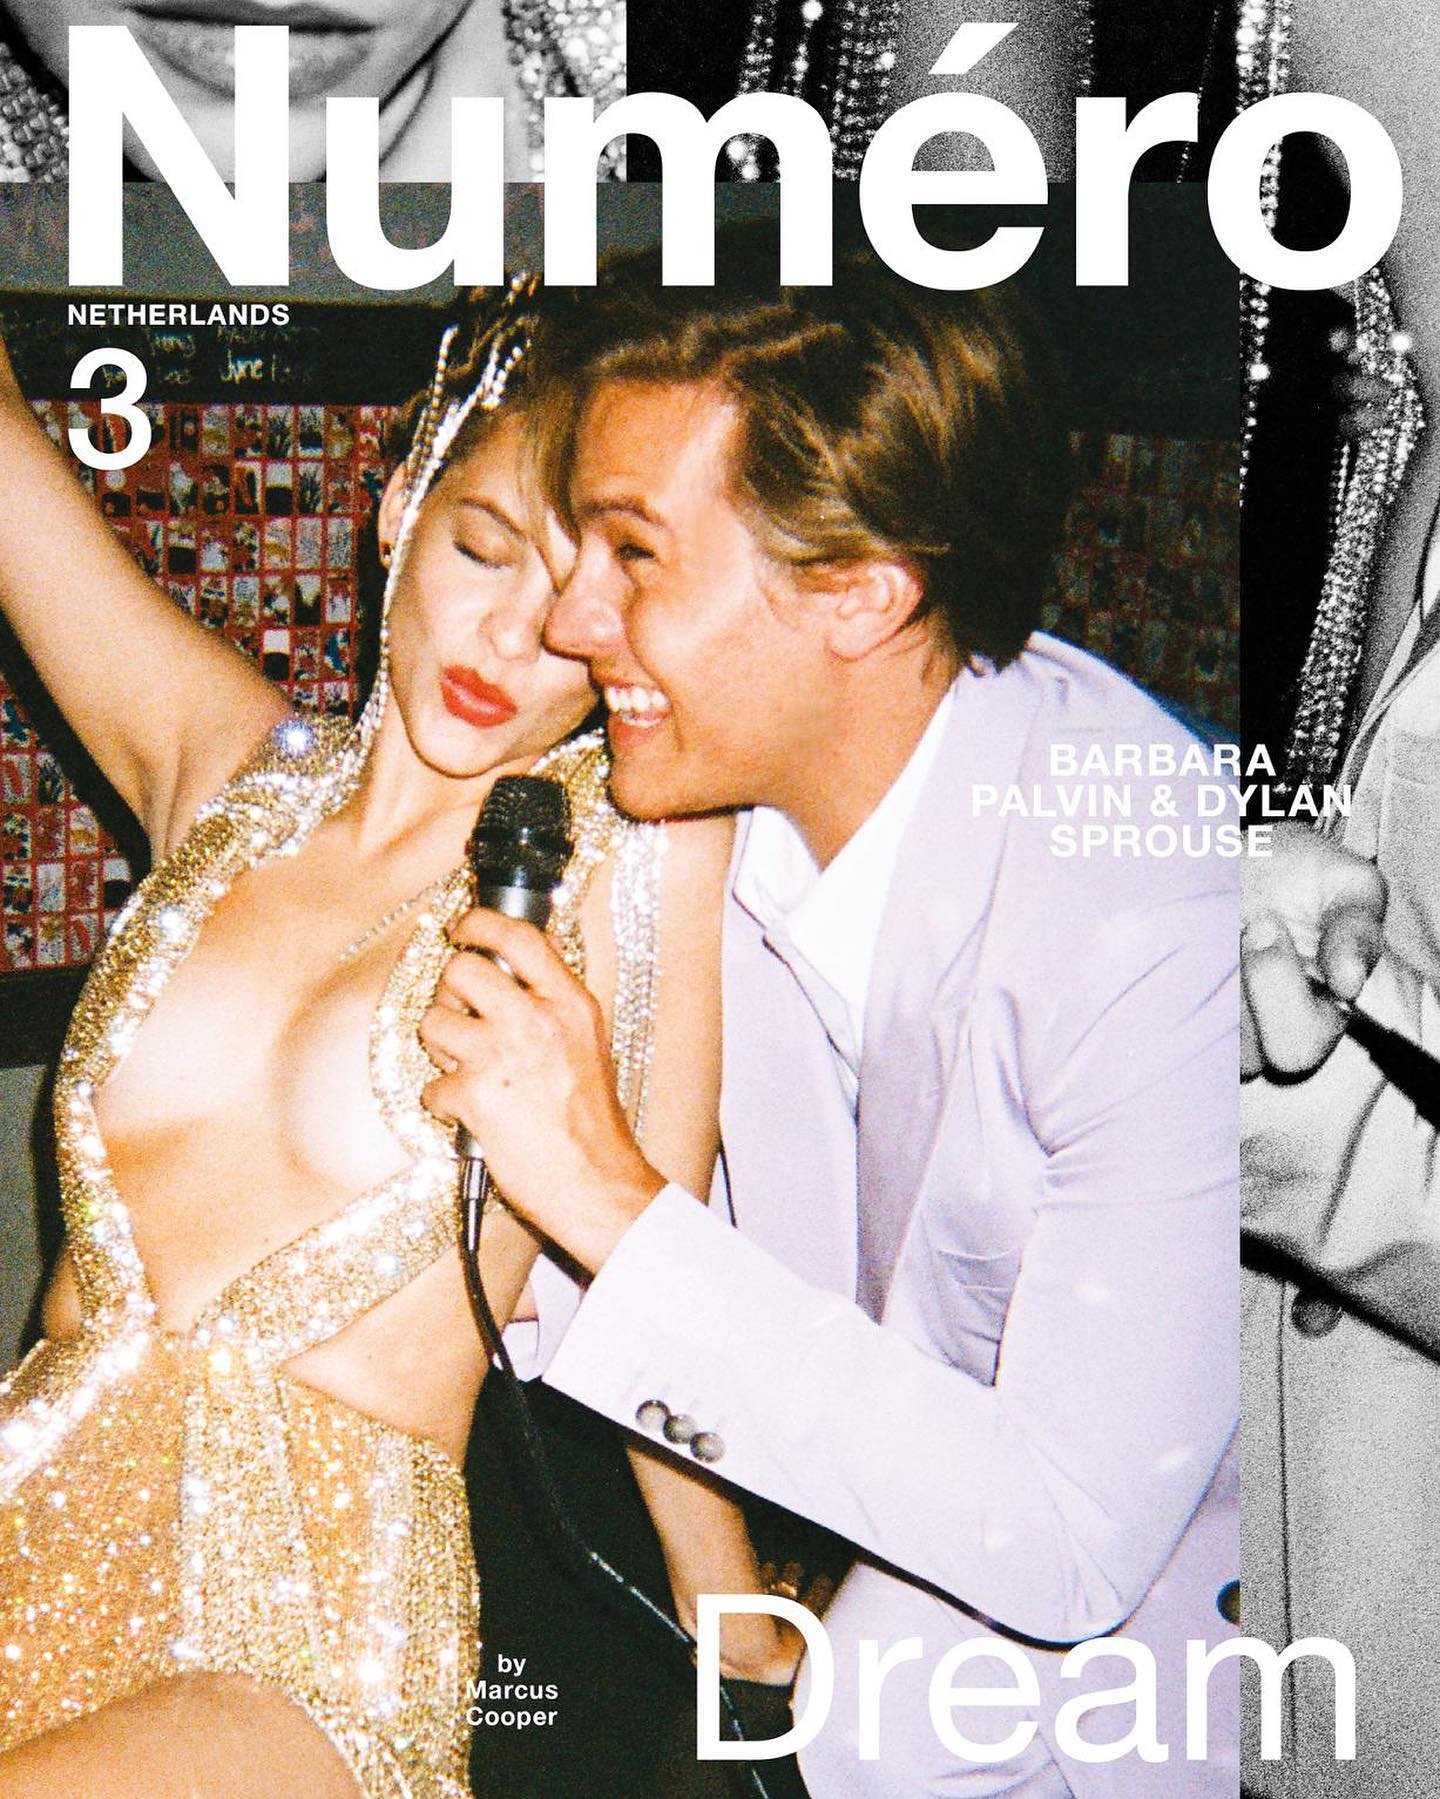 Fotos n°18 : Barbara Palvin y Dylan Sprouse Hit the Cover!